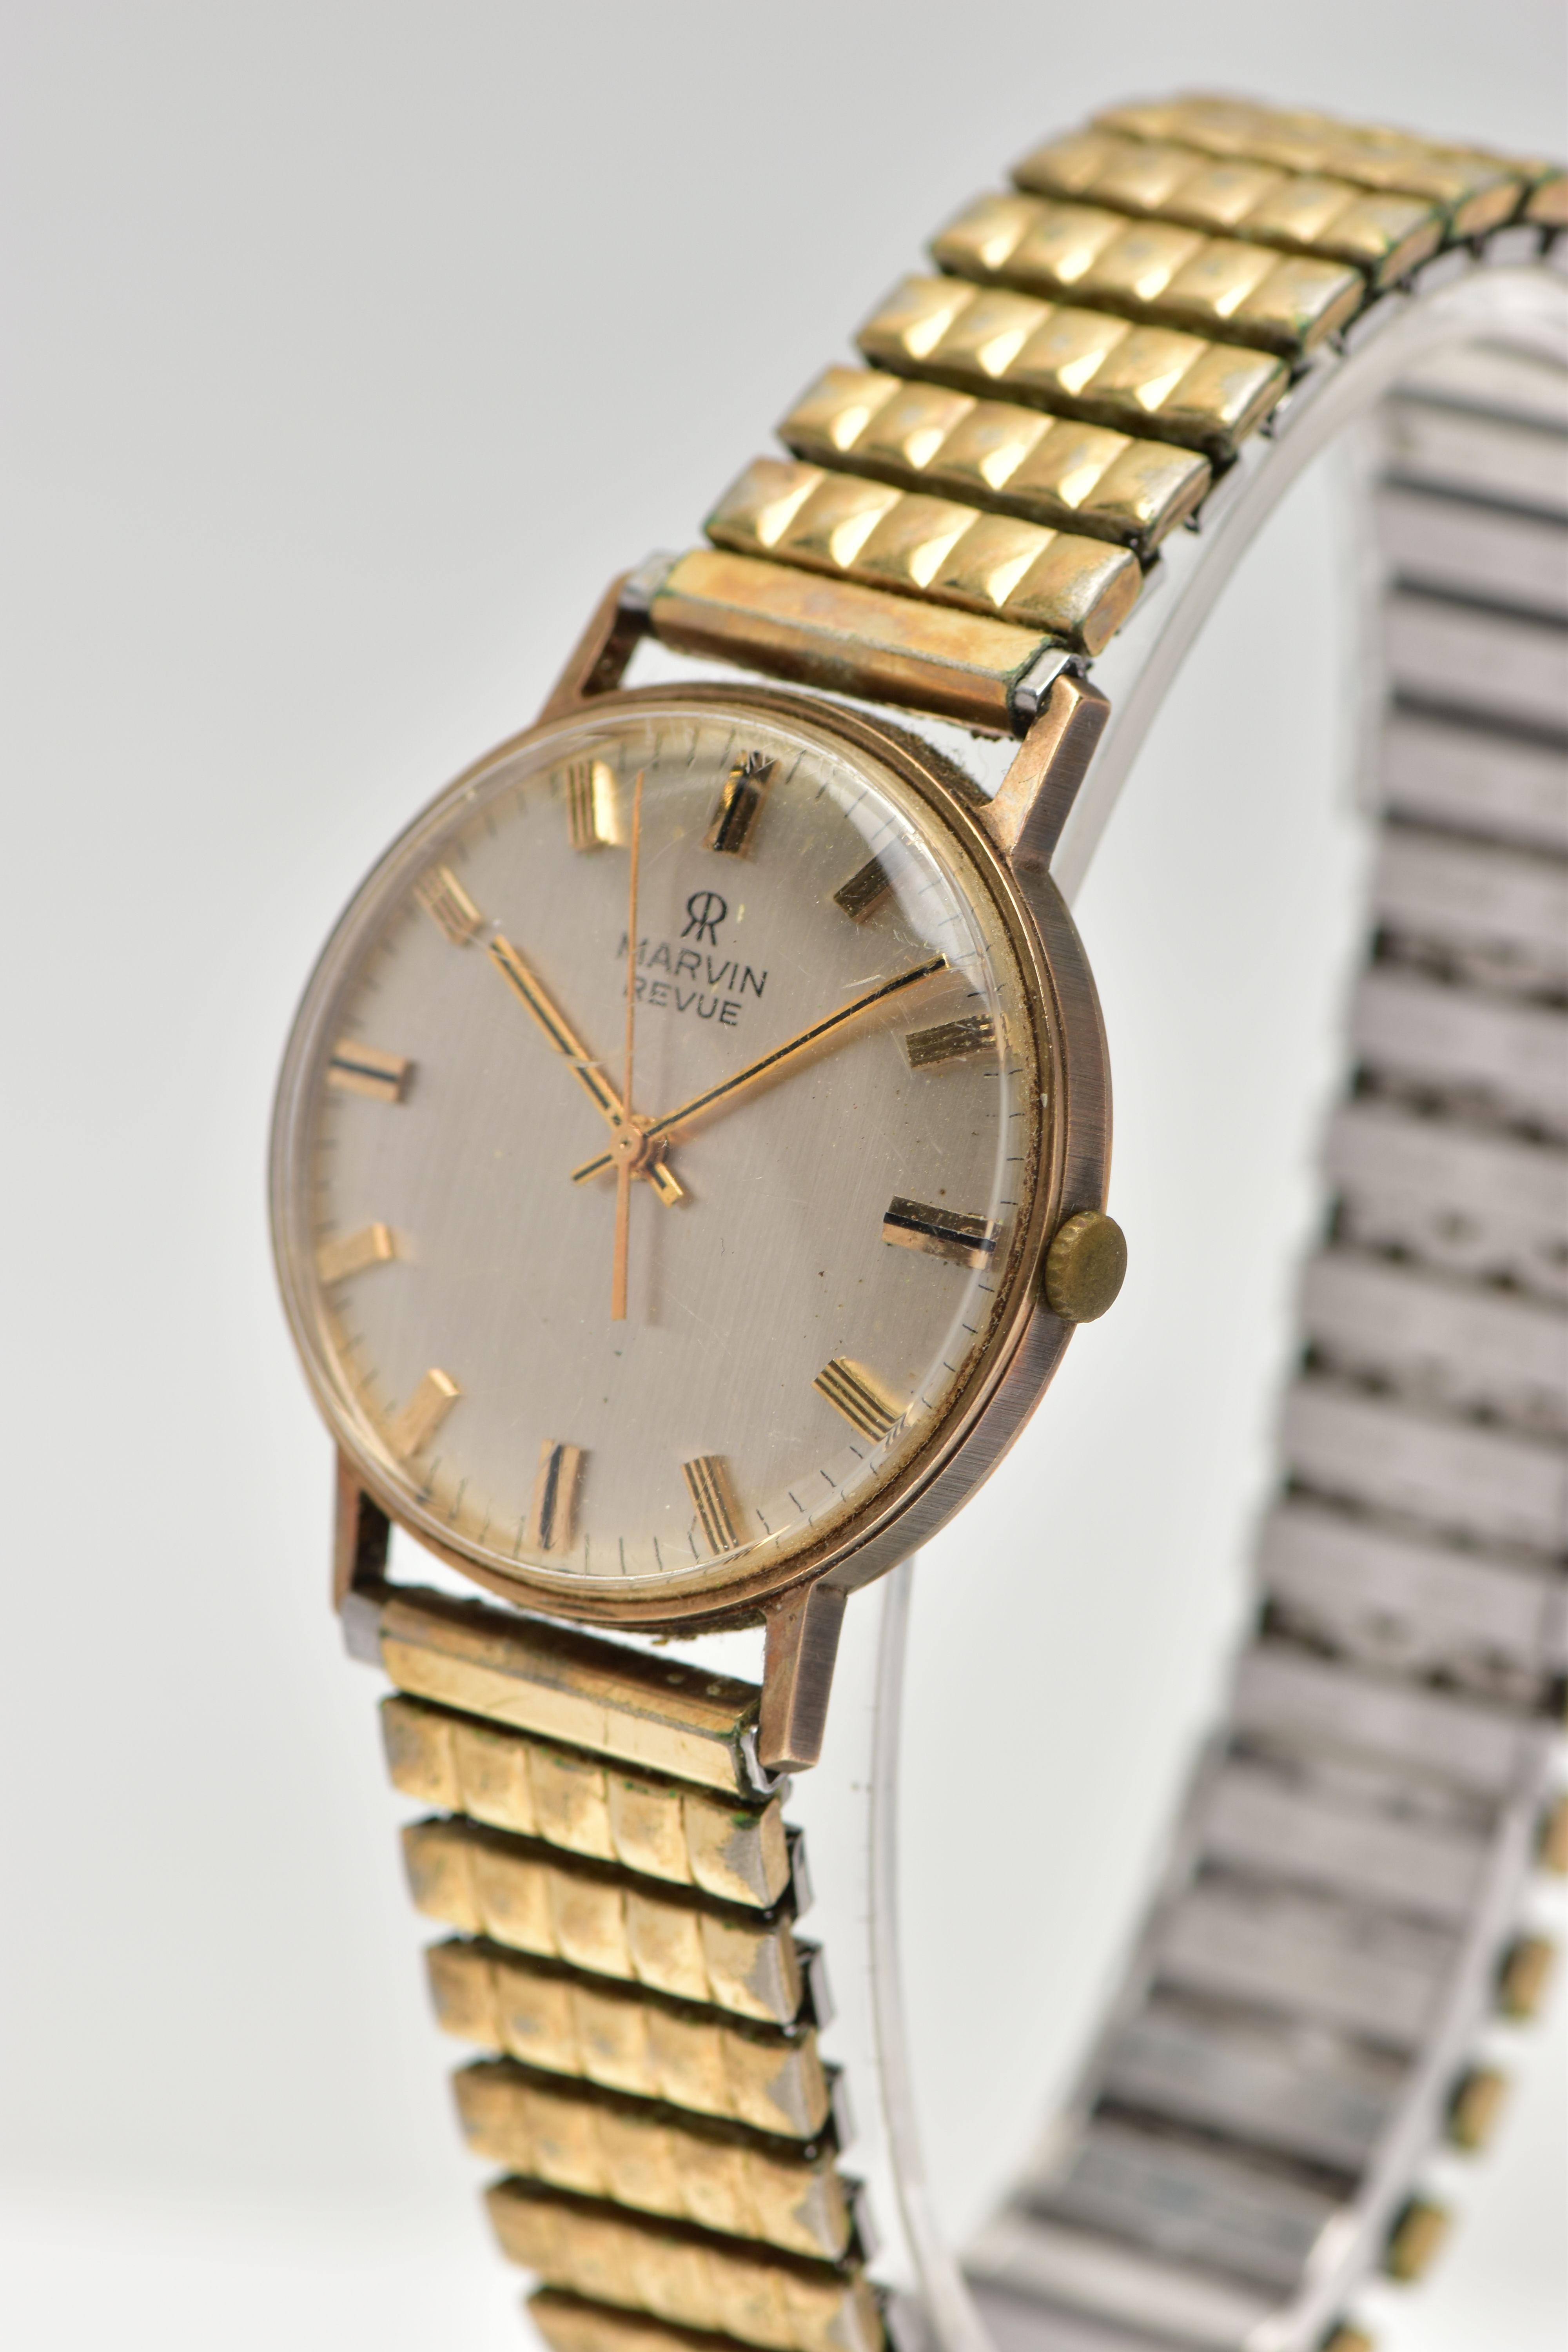 A 9CT GOLD 'MARVIN' WRISTWATCH, manual wind, round dial, signed 'Marvin Revue', baton markers, - Image 3 of 6